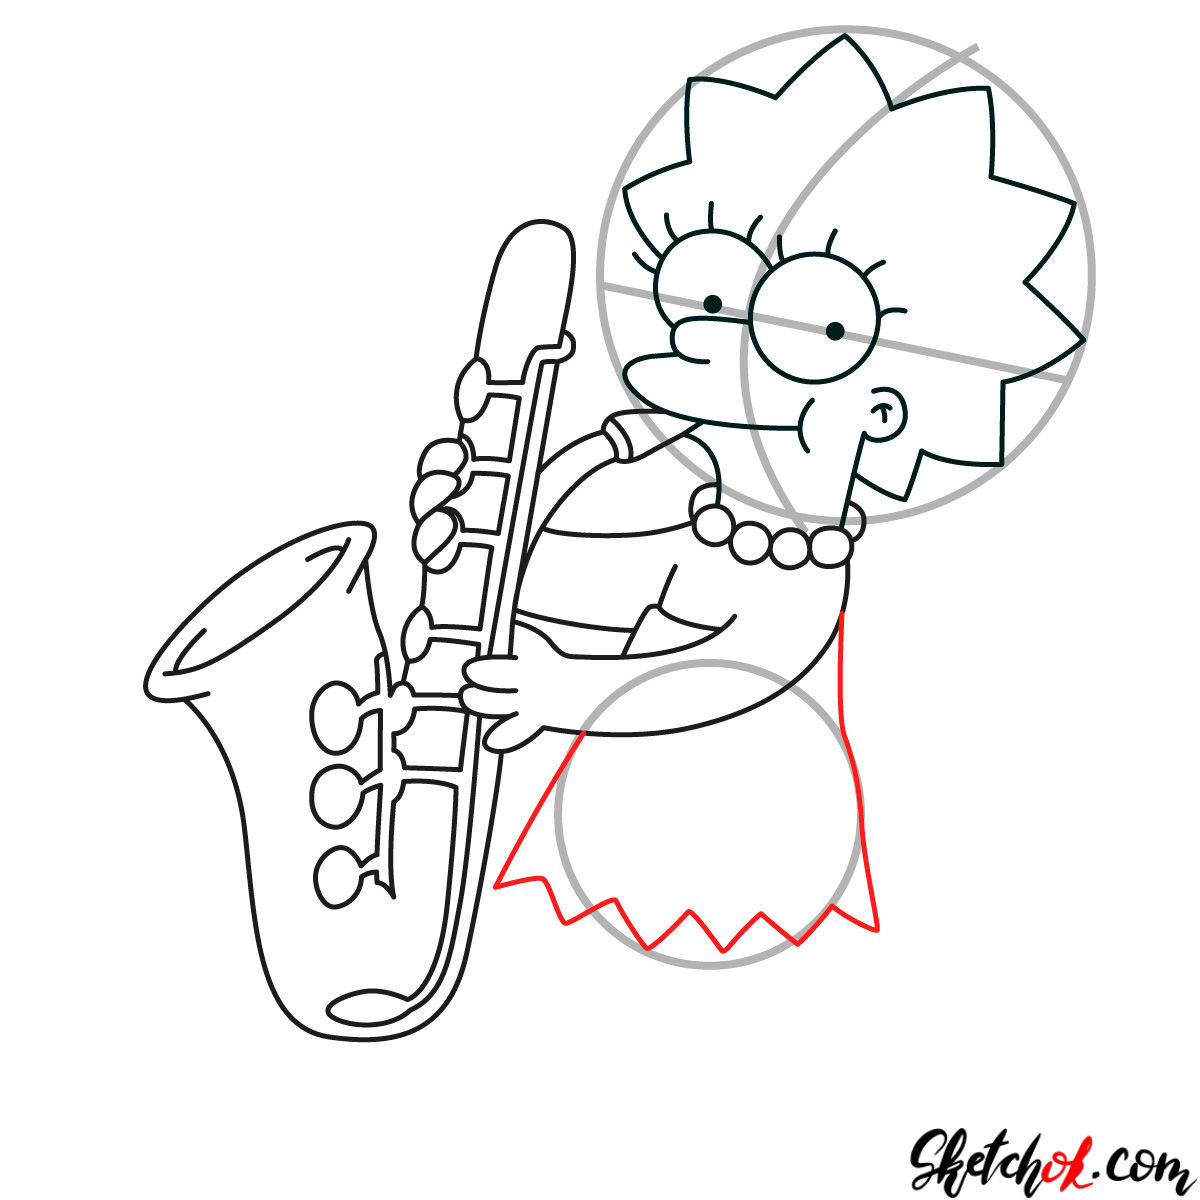 How to draw Lisa Simpson playing the saxophone - Step by step ...